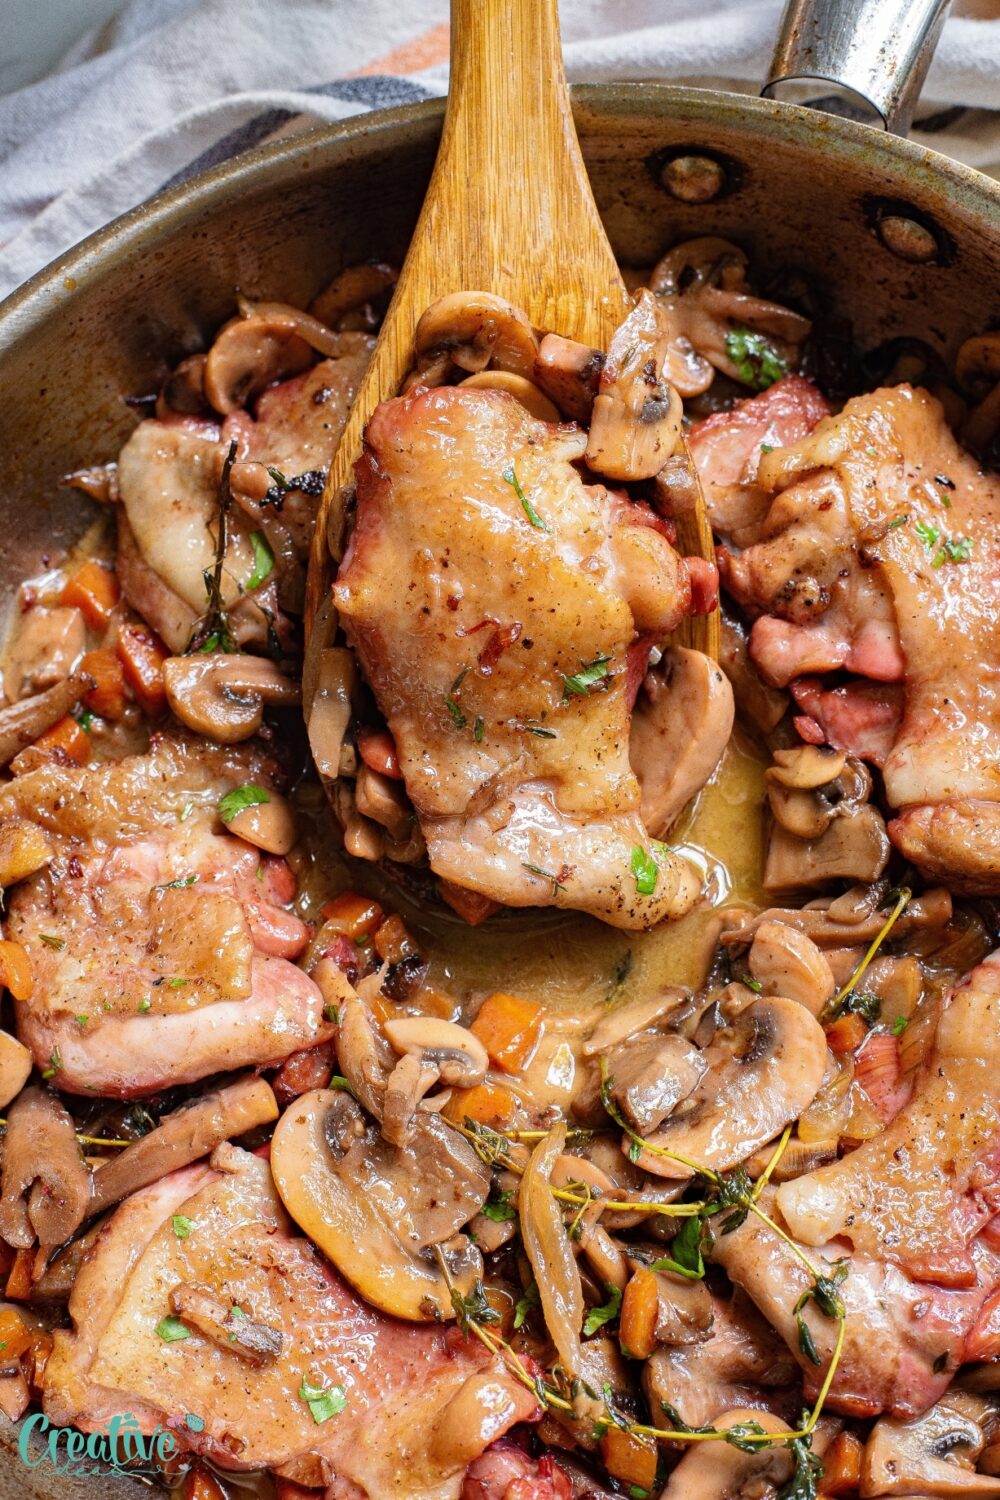 A delicious pan of chicken thighs on skillet and mushrooms sizzling together, creating a mouthwatering aroma.